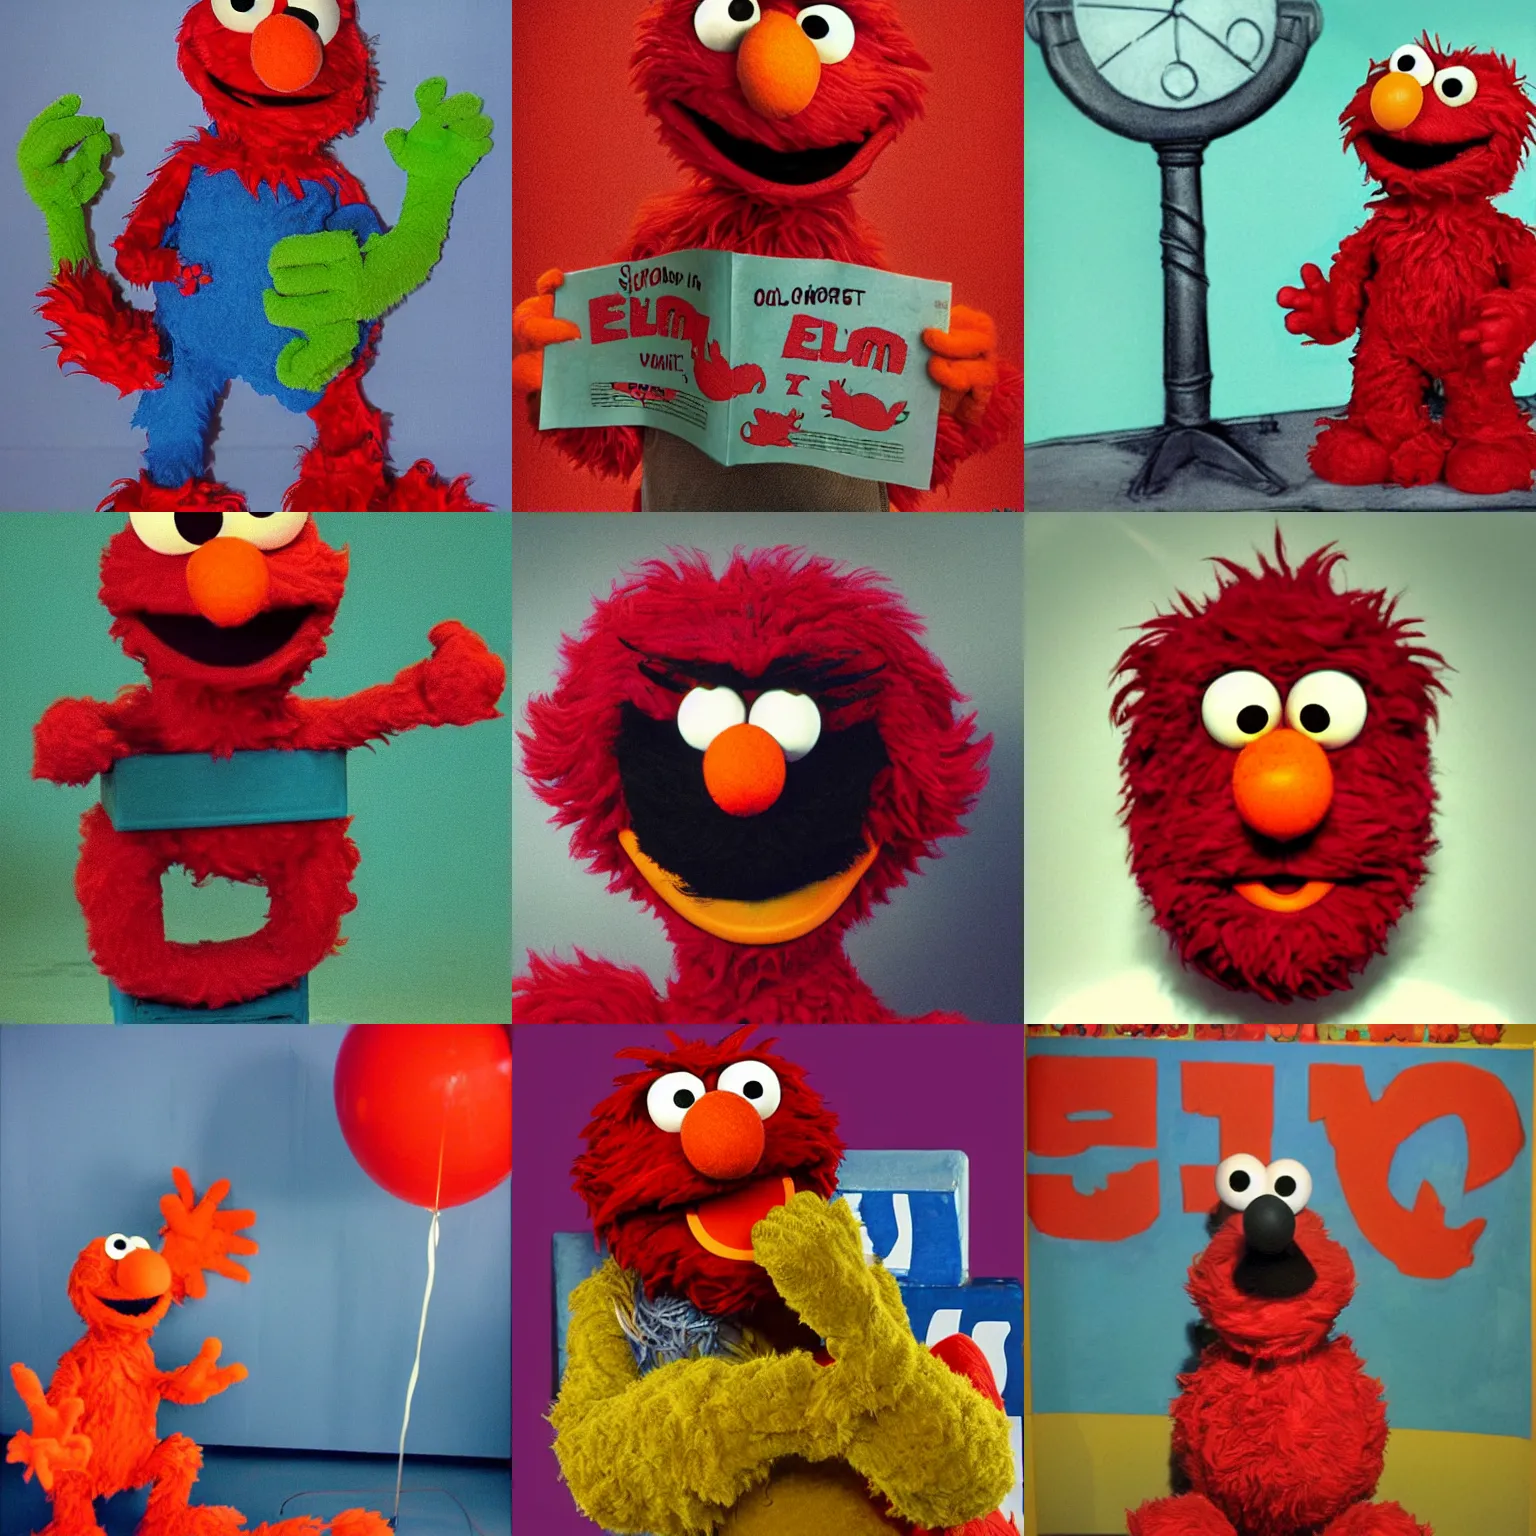 Prompt: elmo from sesame street by h. p. lovecraft